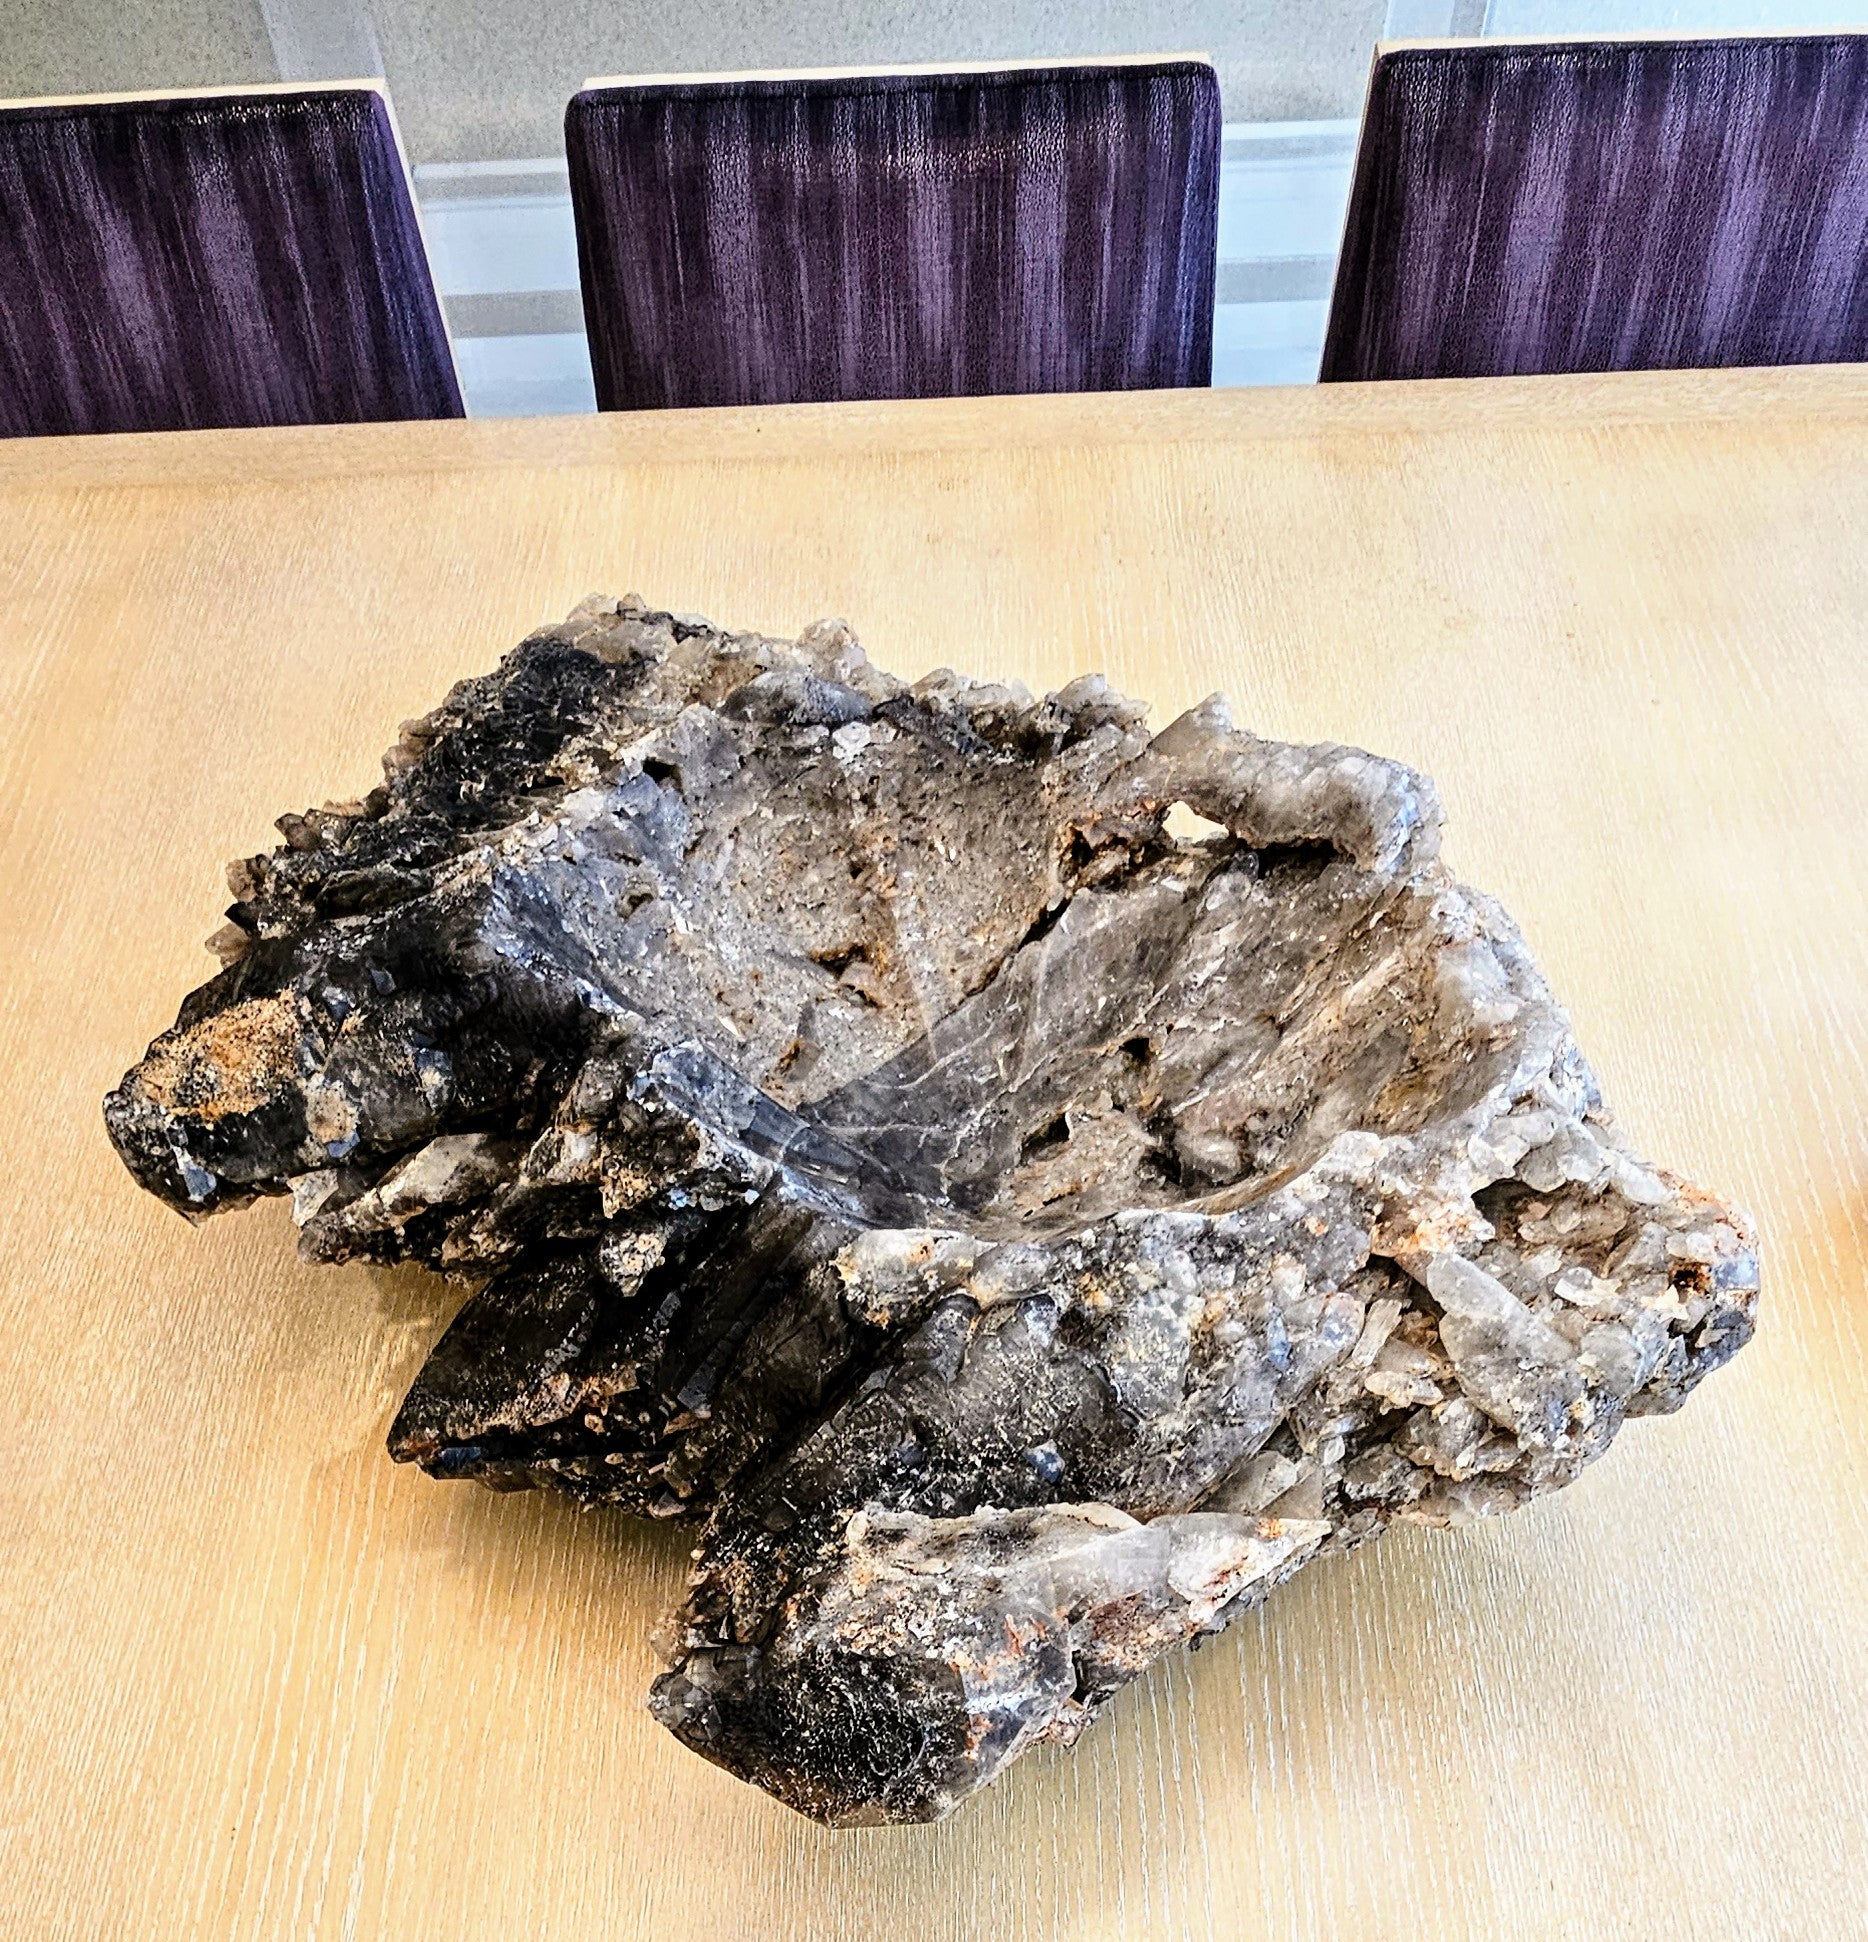 Stunning and unique 30"+ Elestial Smokey Quartz Clamshell Bowl.. weighs nearly 100/lbs